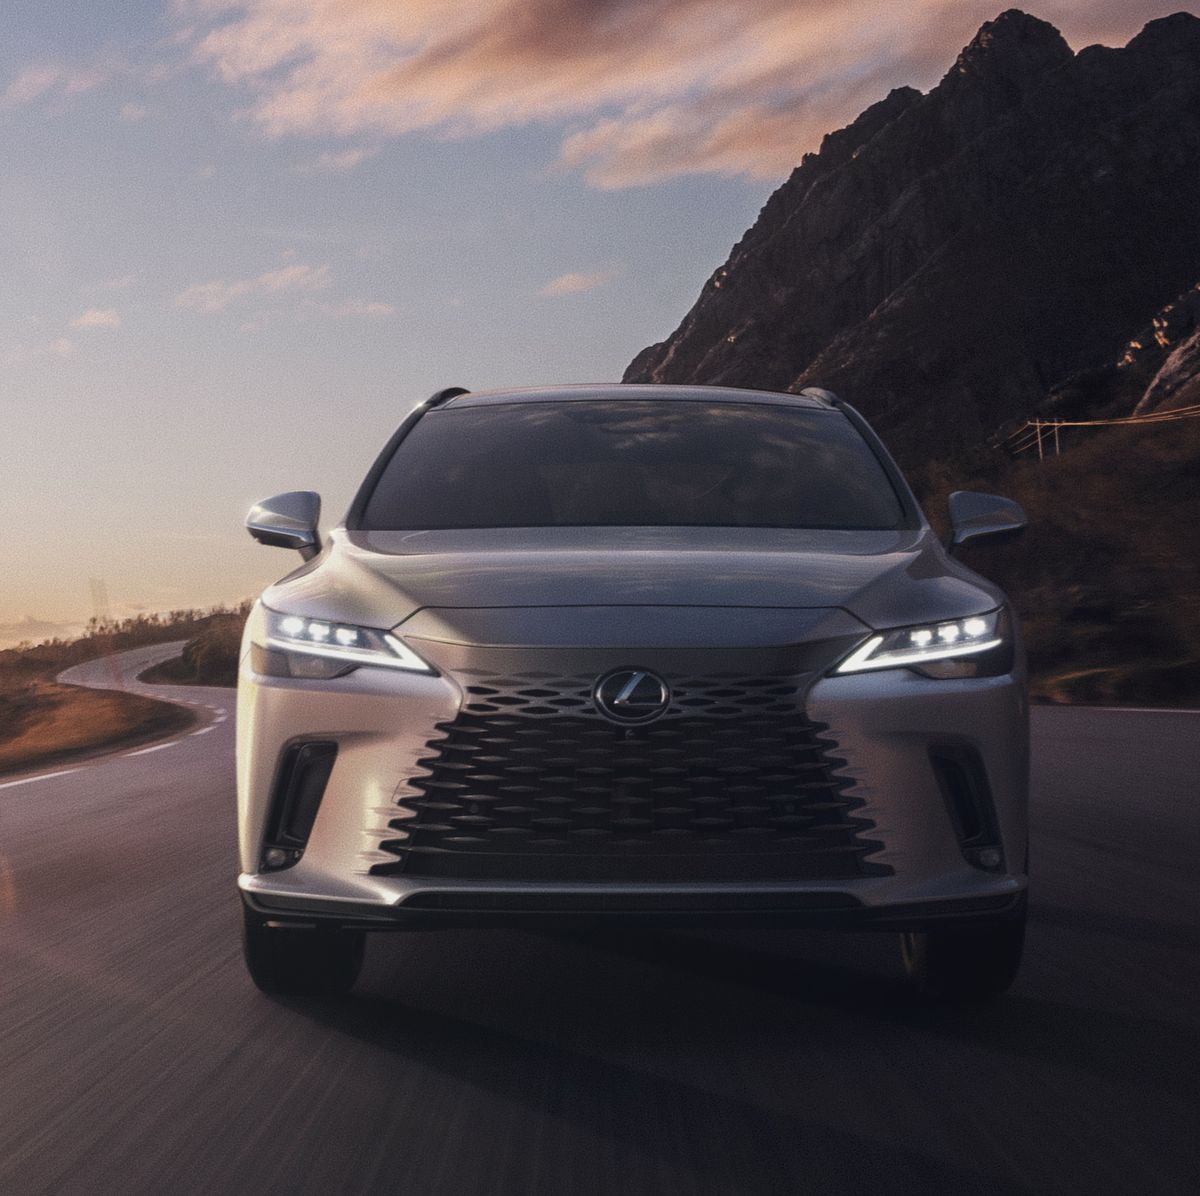 The 2023 Lexus RX Revealed: Here's What You Need to Know